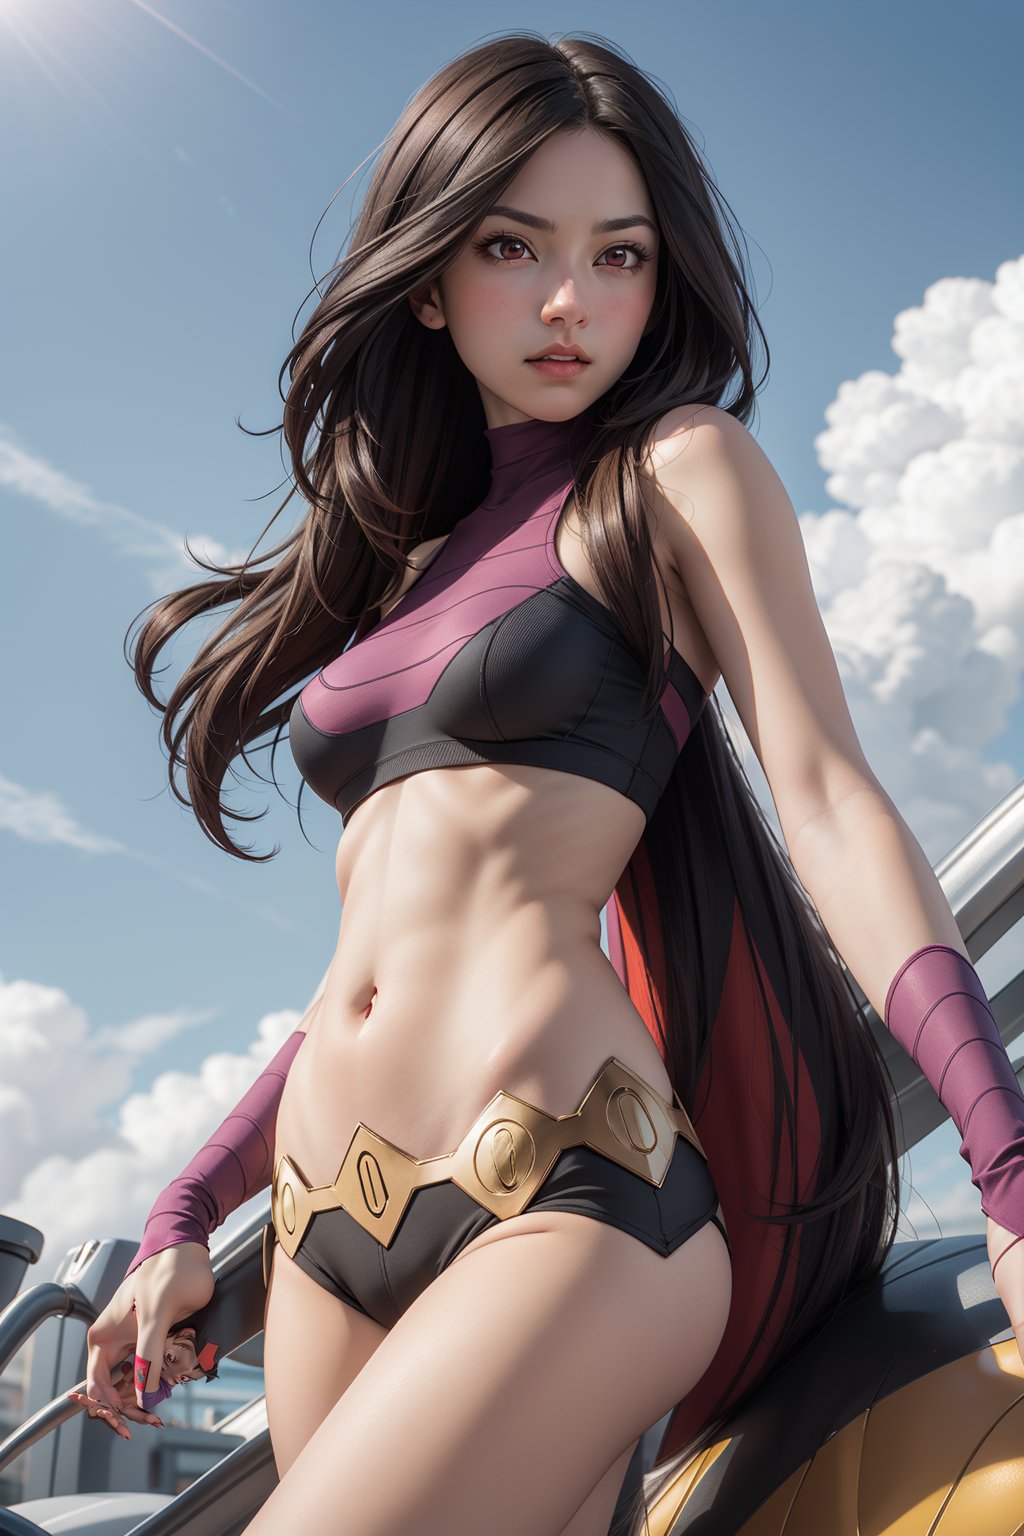 "Generate an realistic image of lucy from the popular anime series 'Pokemon', lucy stands with Savage, her brown hair flowing, and his bright red eyes winked. The scene is set against a backdrop of a lush sky, Navel, bold, sexy,lucy (pokemon)